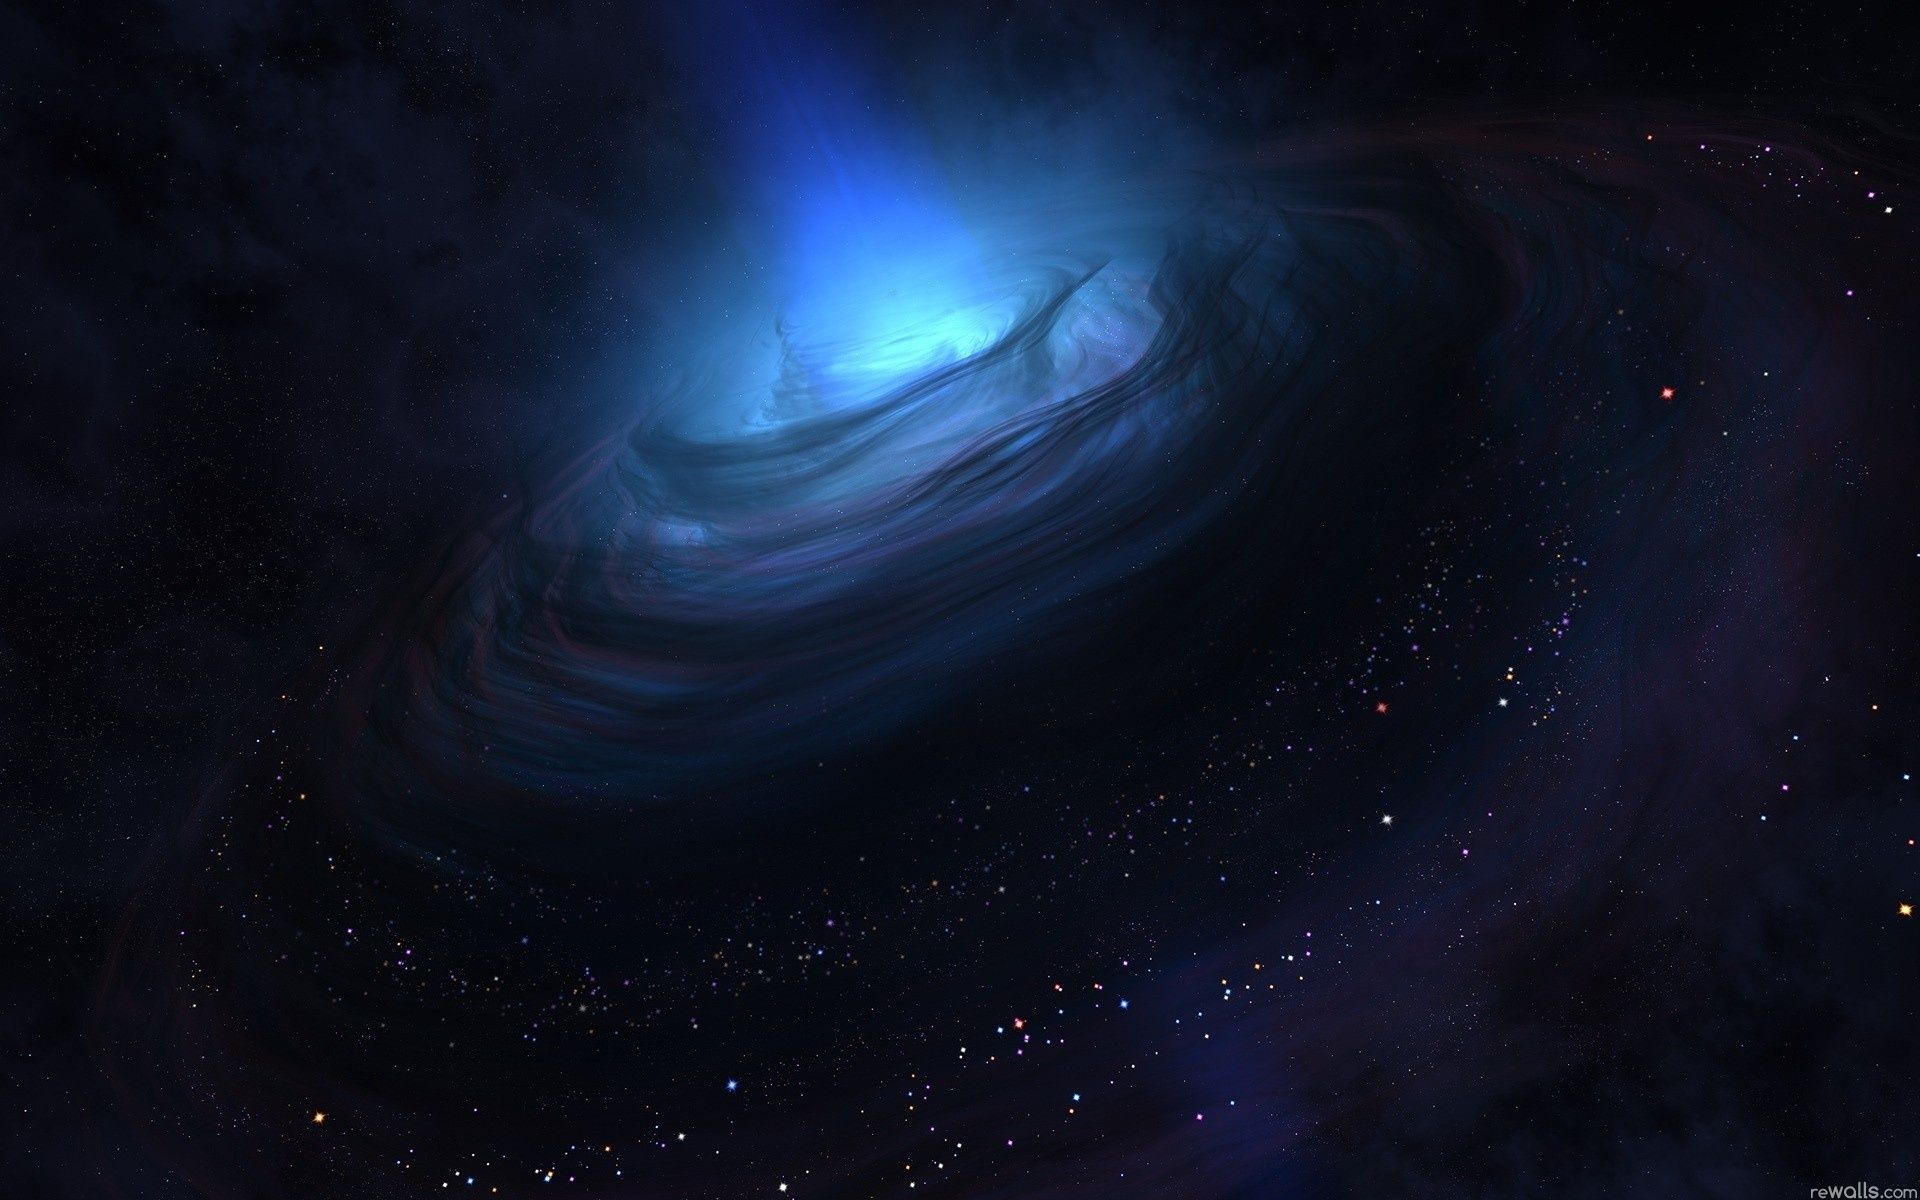 Black Hole Wallpaper HD. Black hole wallpaper, Black holes in space, Space art